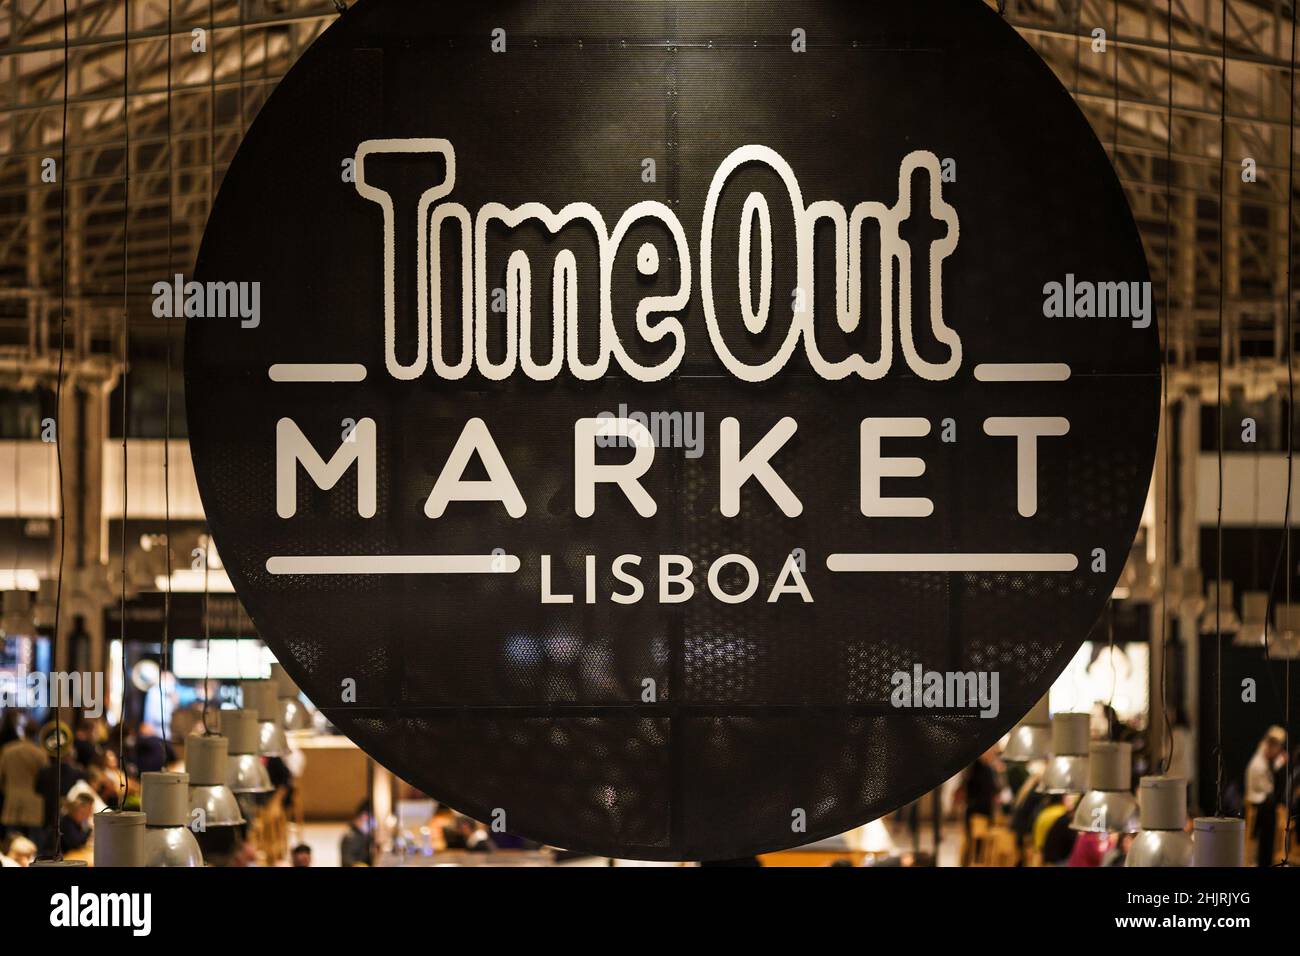 Lisbon, Portugal - November 20 2021: Interior view of the Time Out Market Lisboa, a trendy food hall located in the Mercado da Ribeira at Cais do Sodr Stock Photo